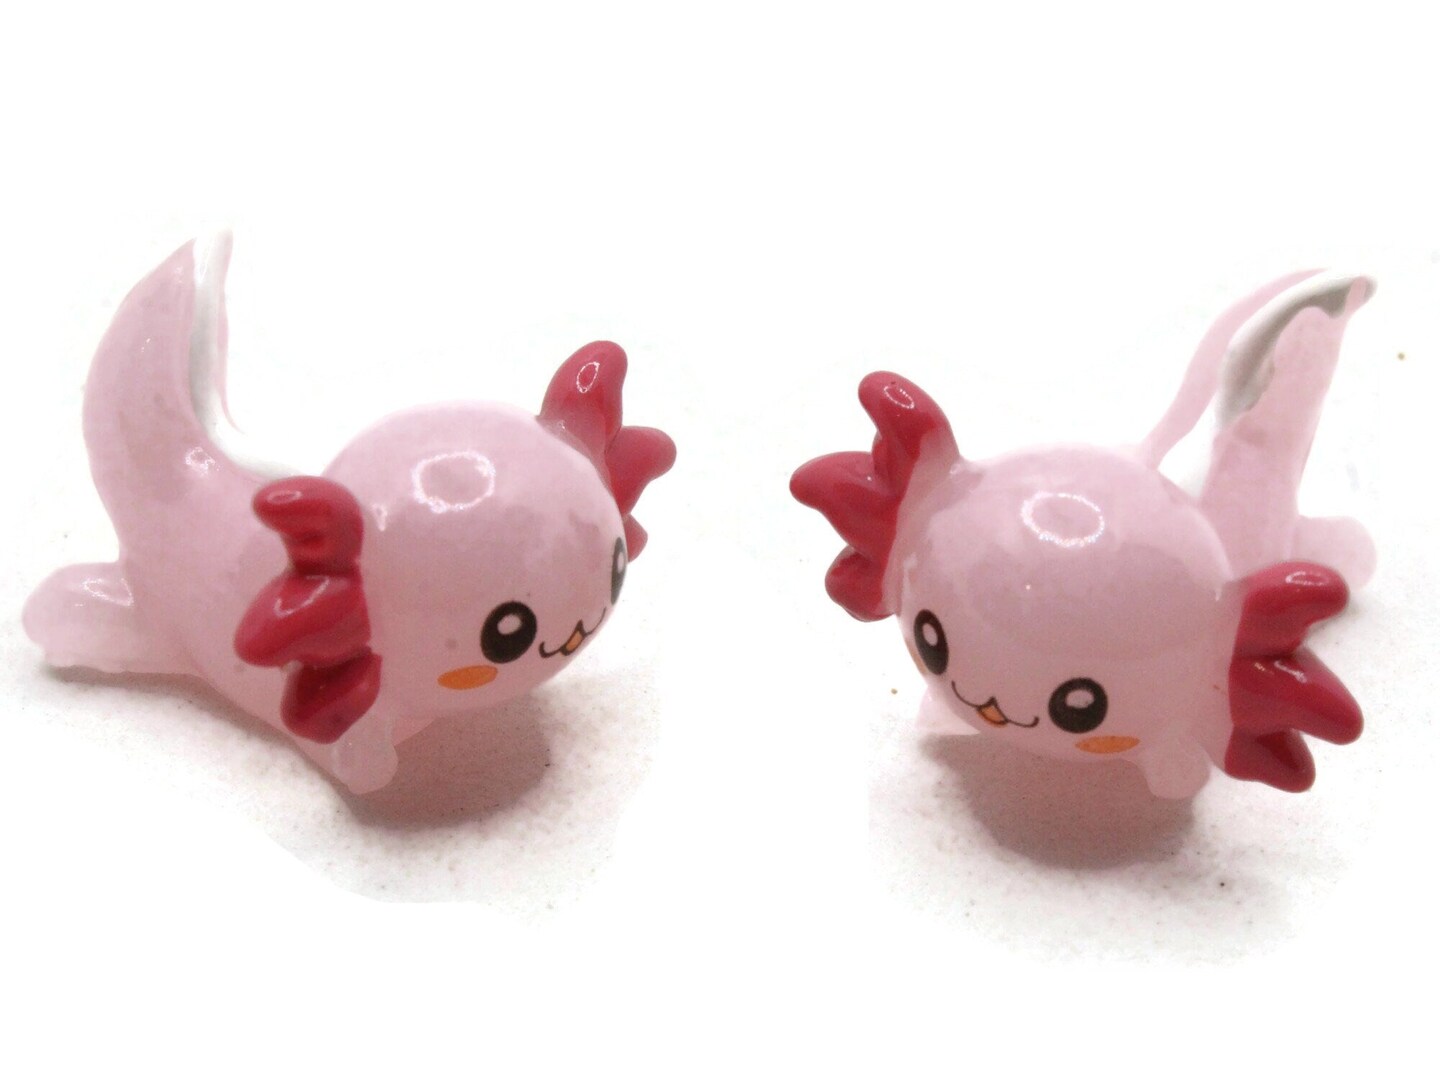 Axolotl cup holder from Polymer clay - Commission by